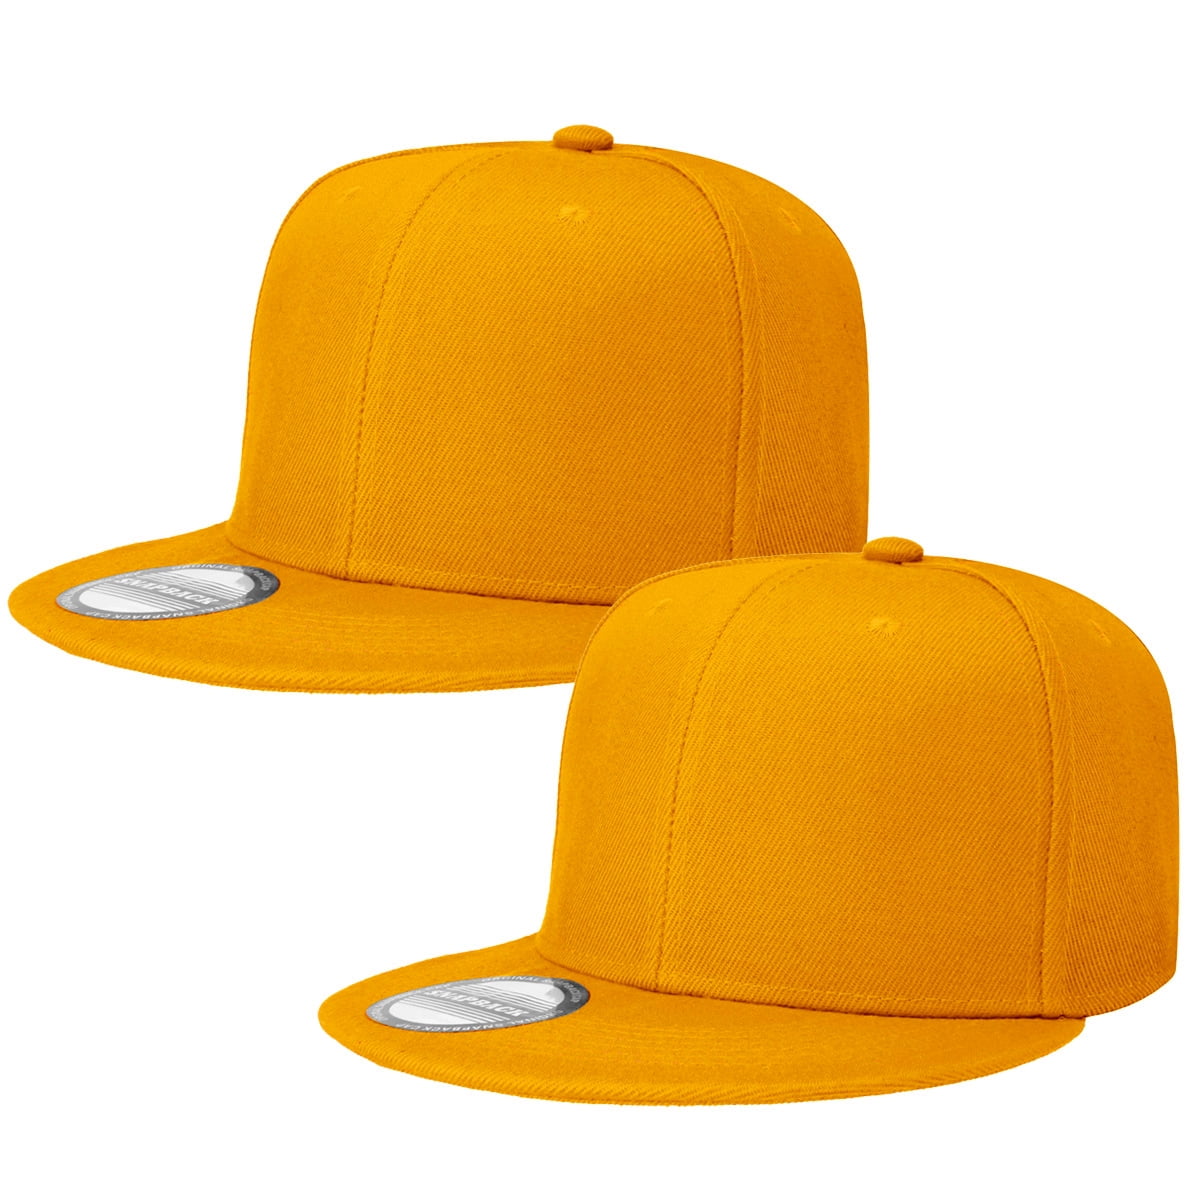 2-pack Classic Snapback Hat Cap Hip Hop Style Flat Bill Blank Solid Color Adjustable Size Gold & Gold